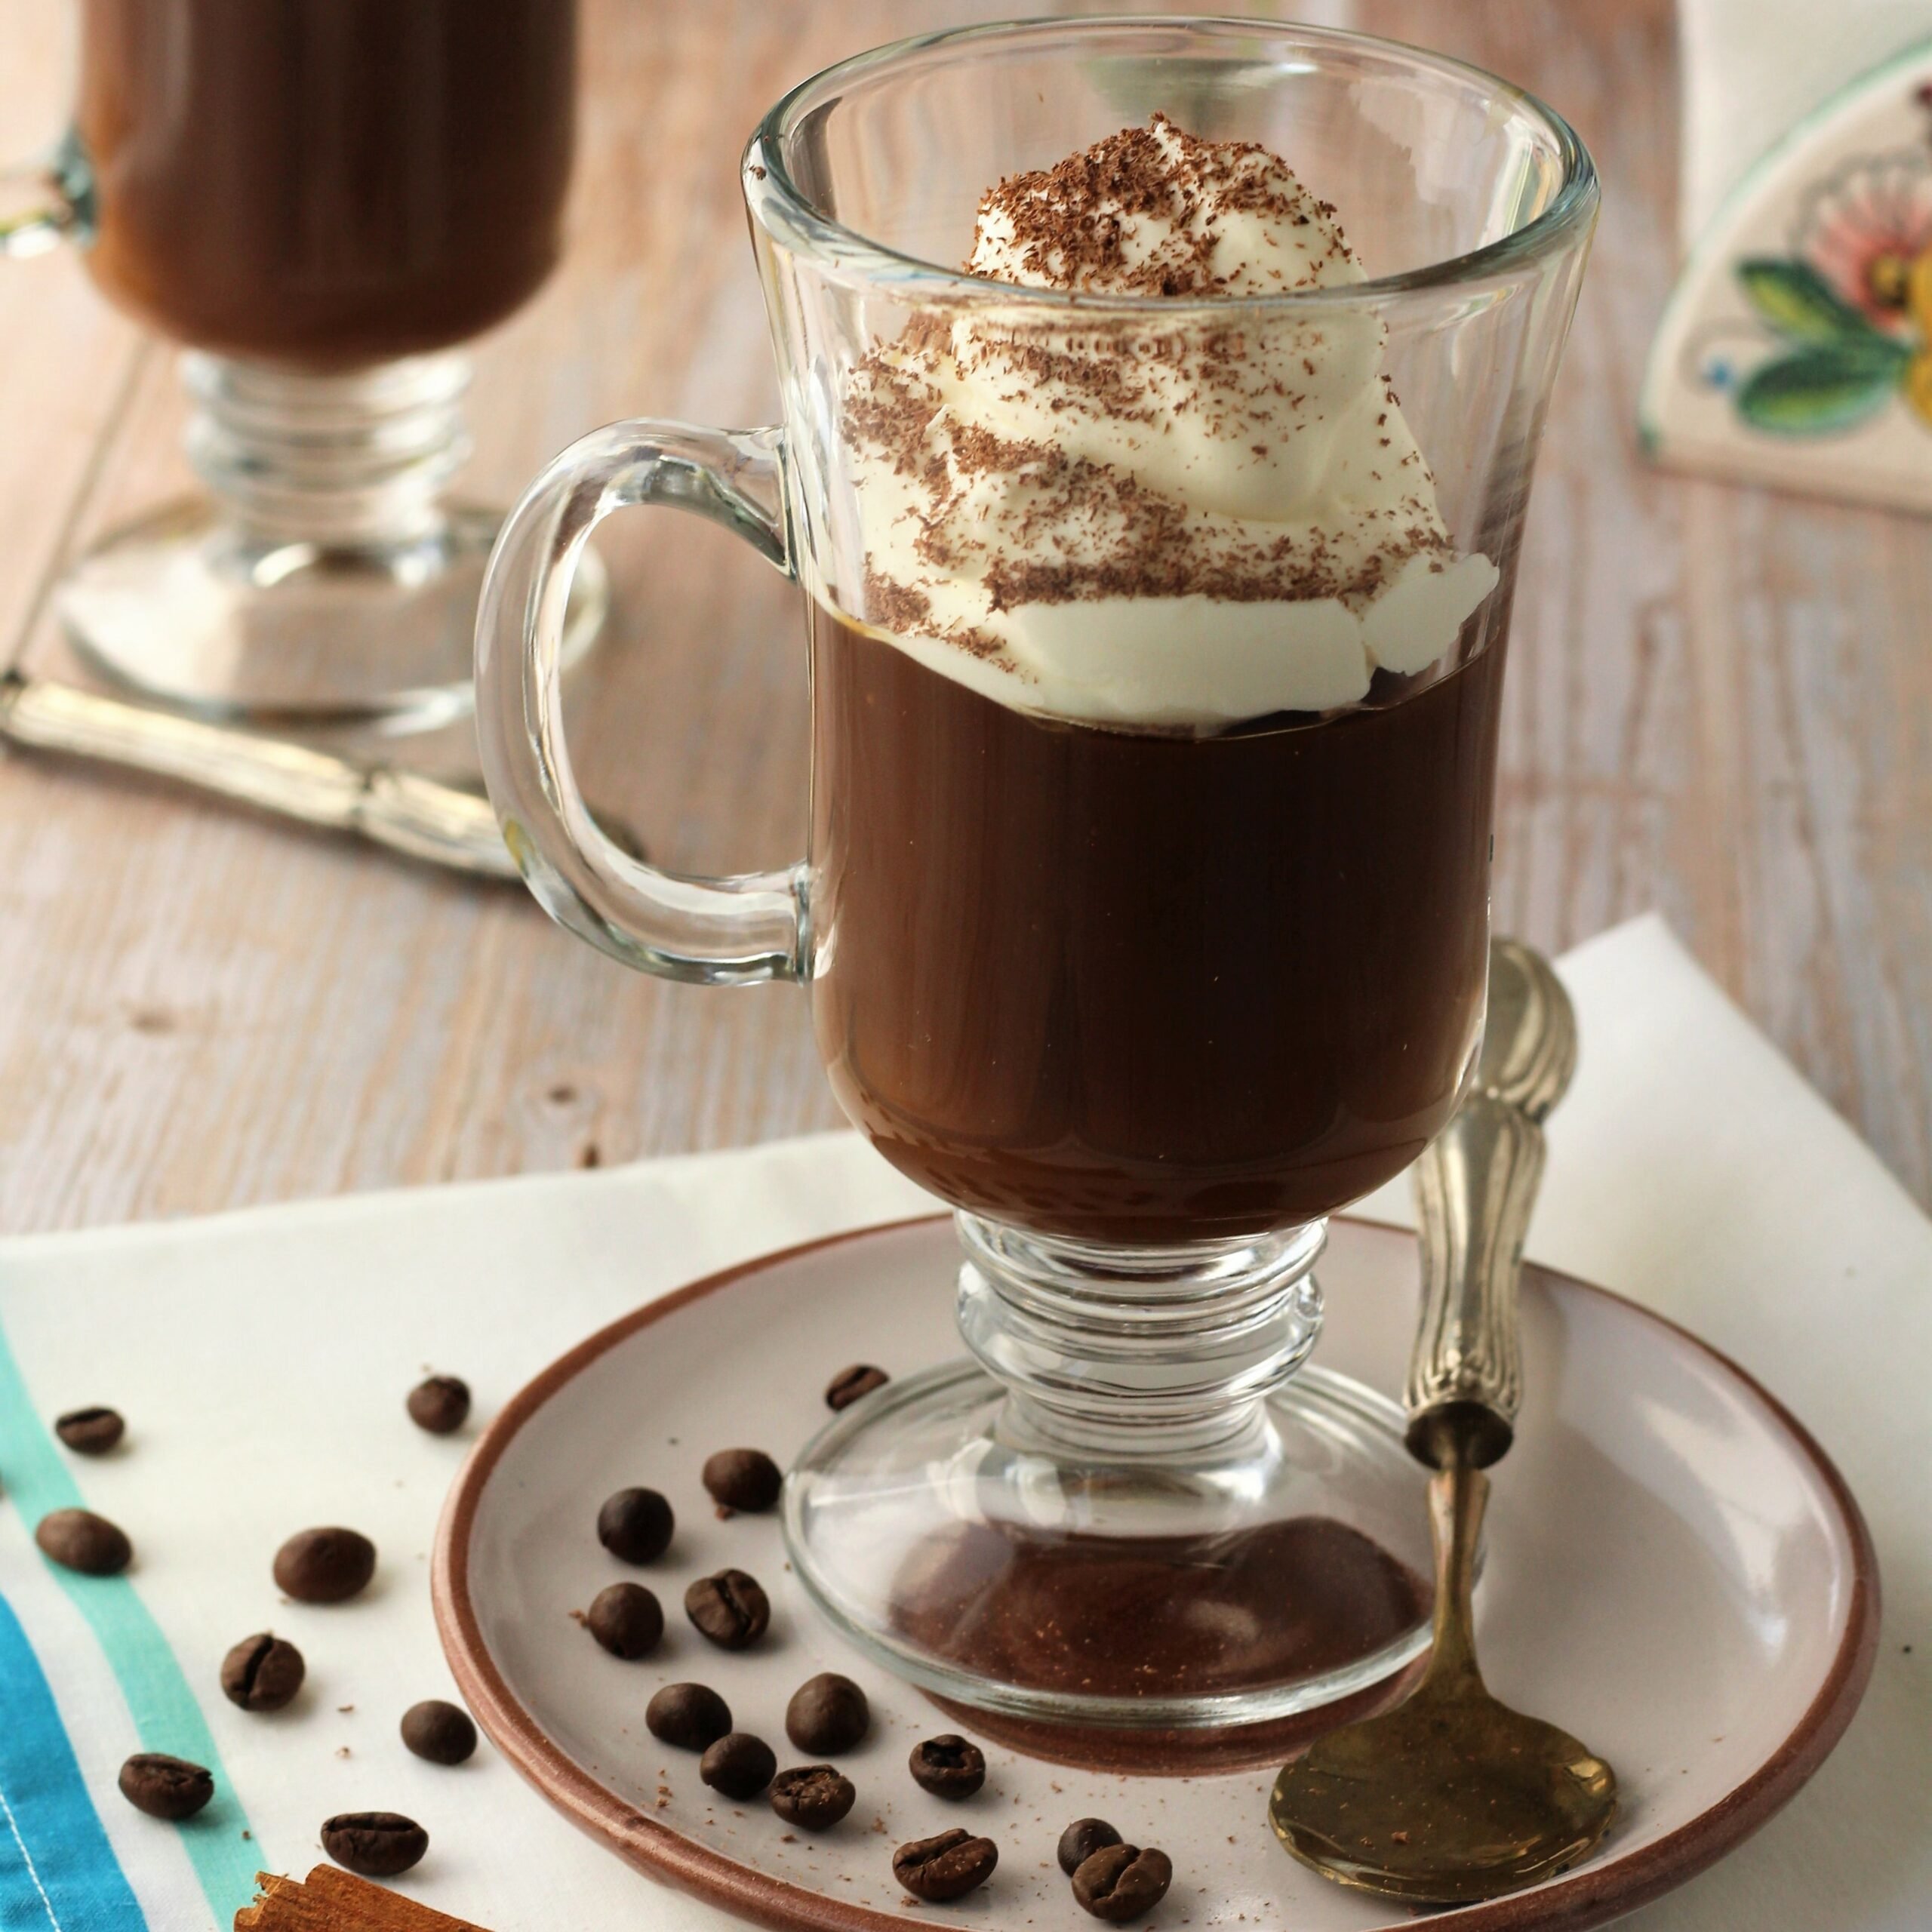 Gelo di caffè, coffee pudding, in glass with whipped cream.